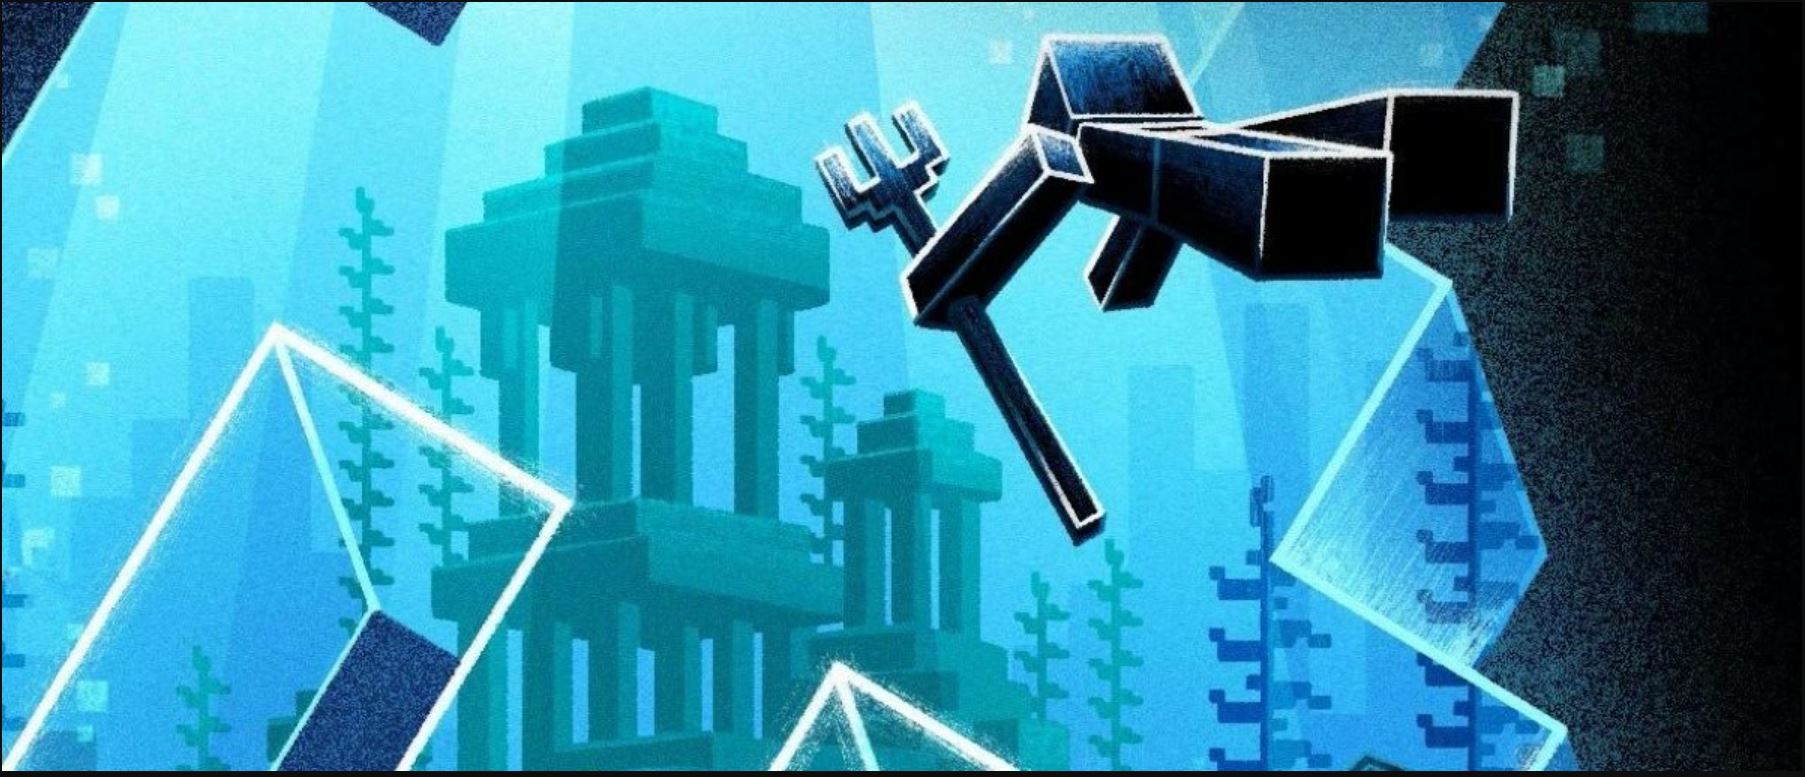 A New Officially Minecraft Novel Called The ShipWreck Written By The Author CB Lee